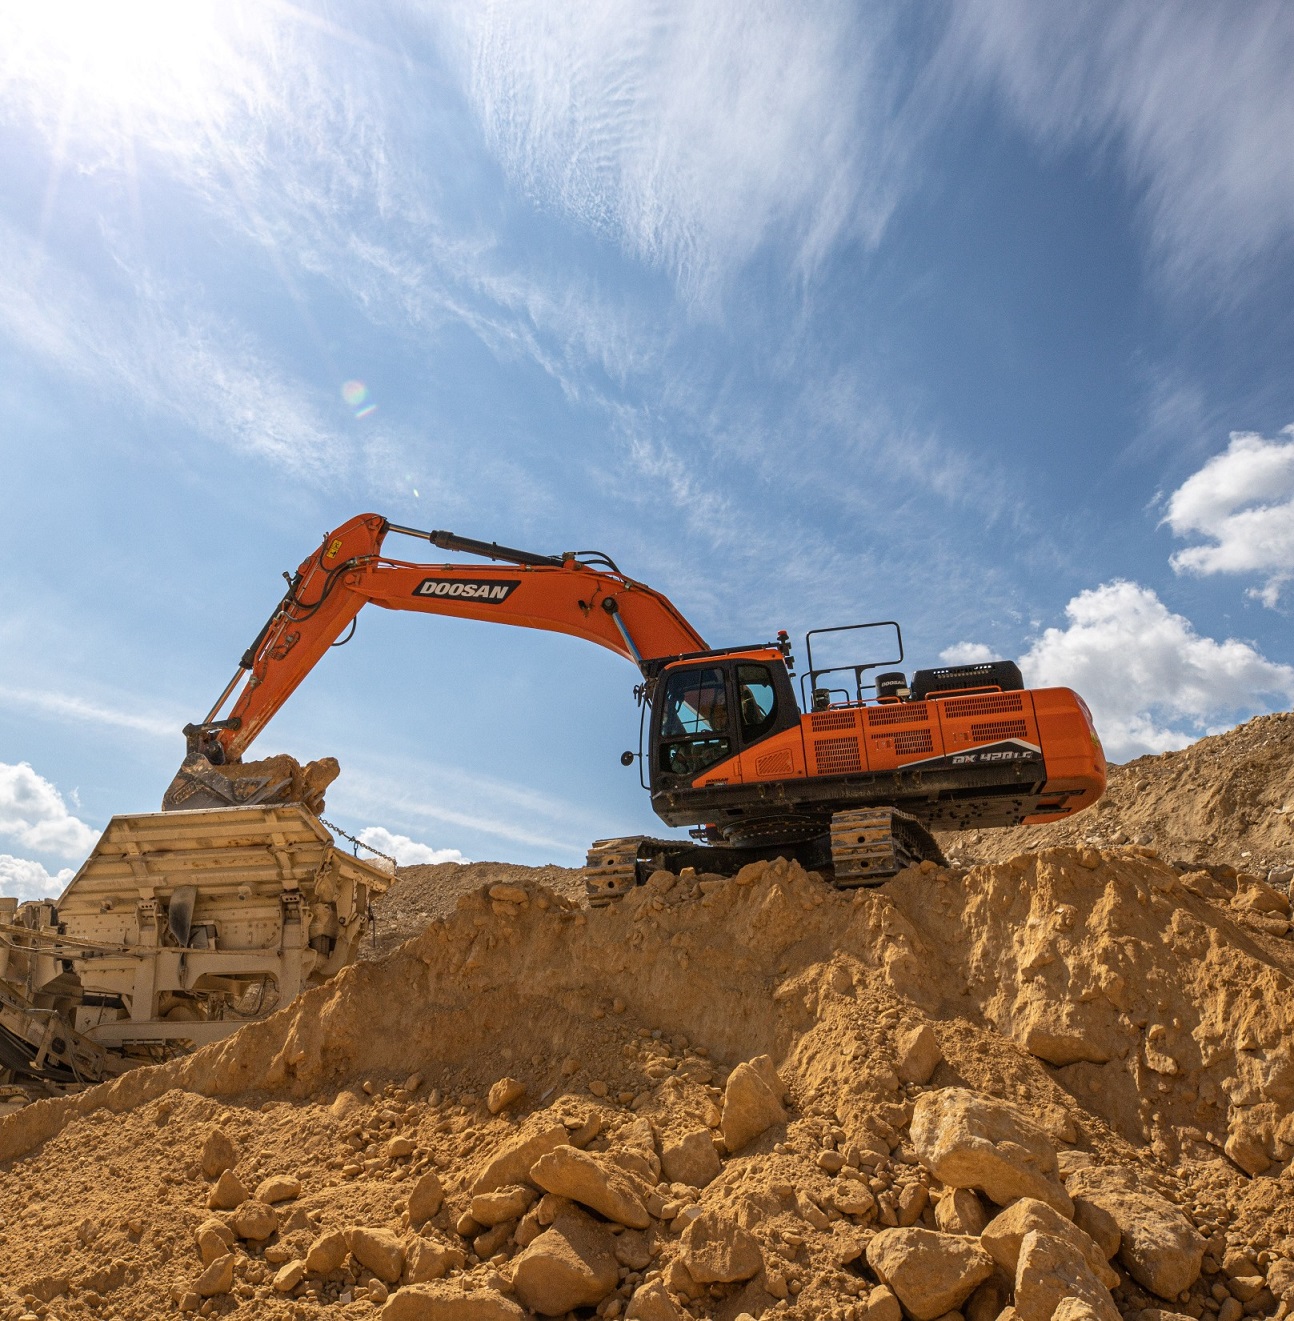 The DX420LC-7 excavator offers better fuel efficiency than the previous DX420LC-5 model